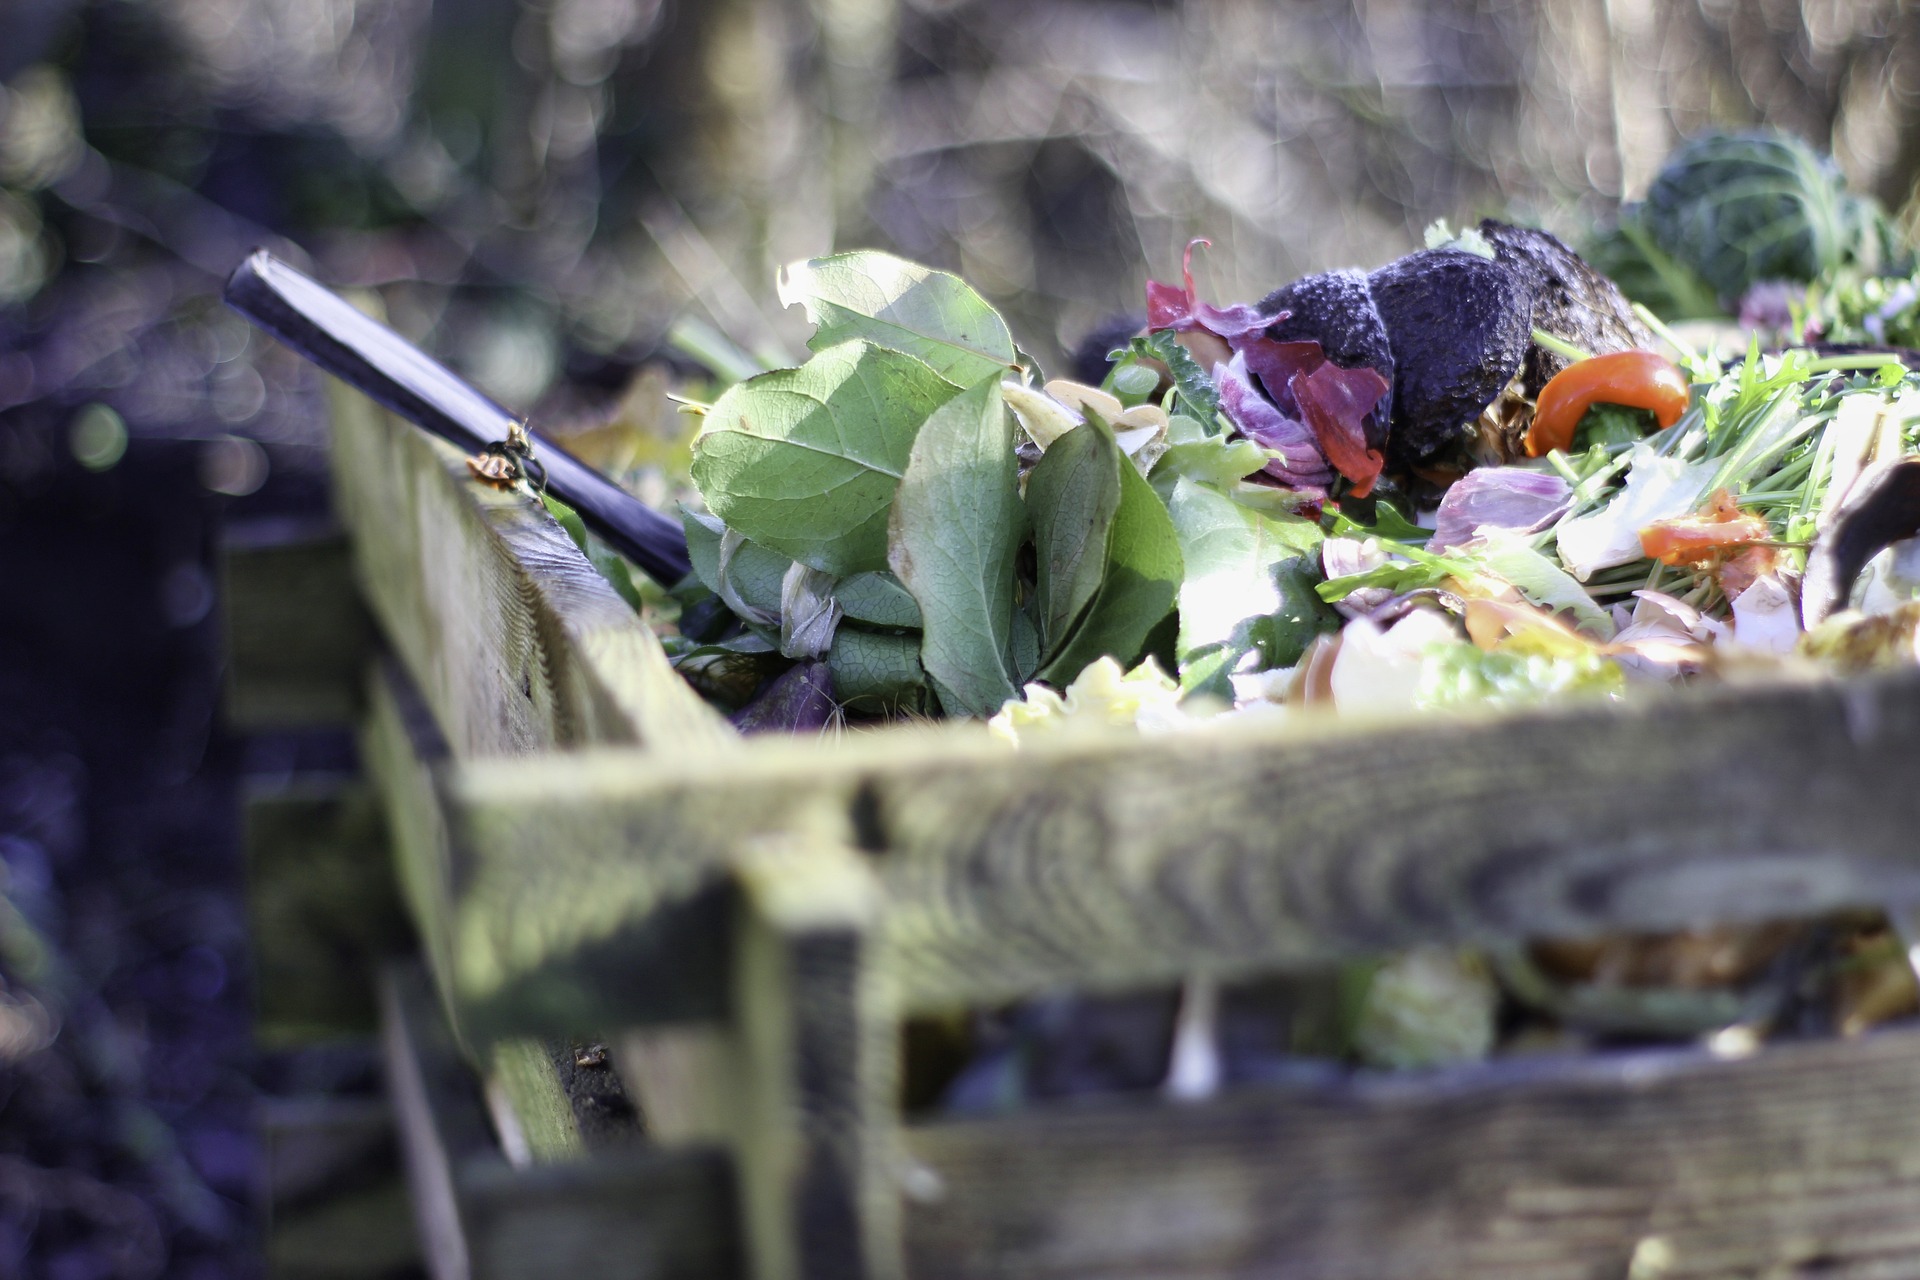 A compost heap filled with fruit and vegetable scraps.